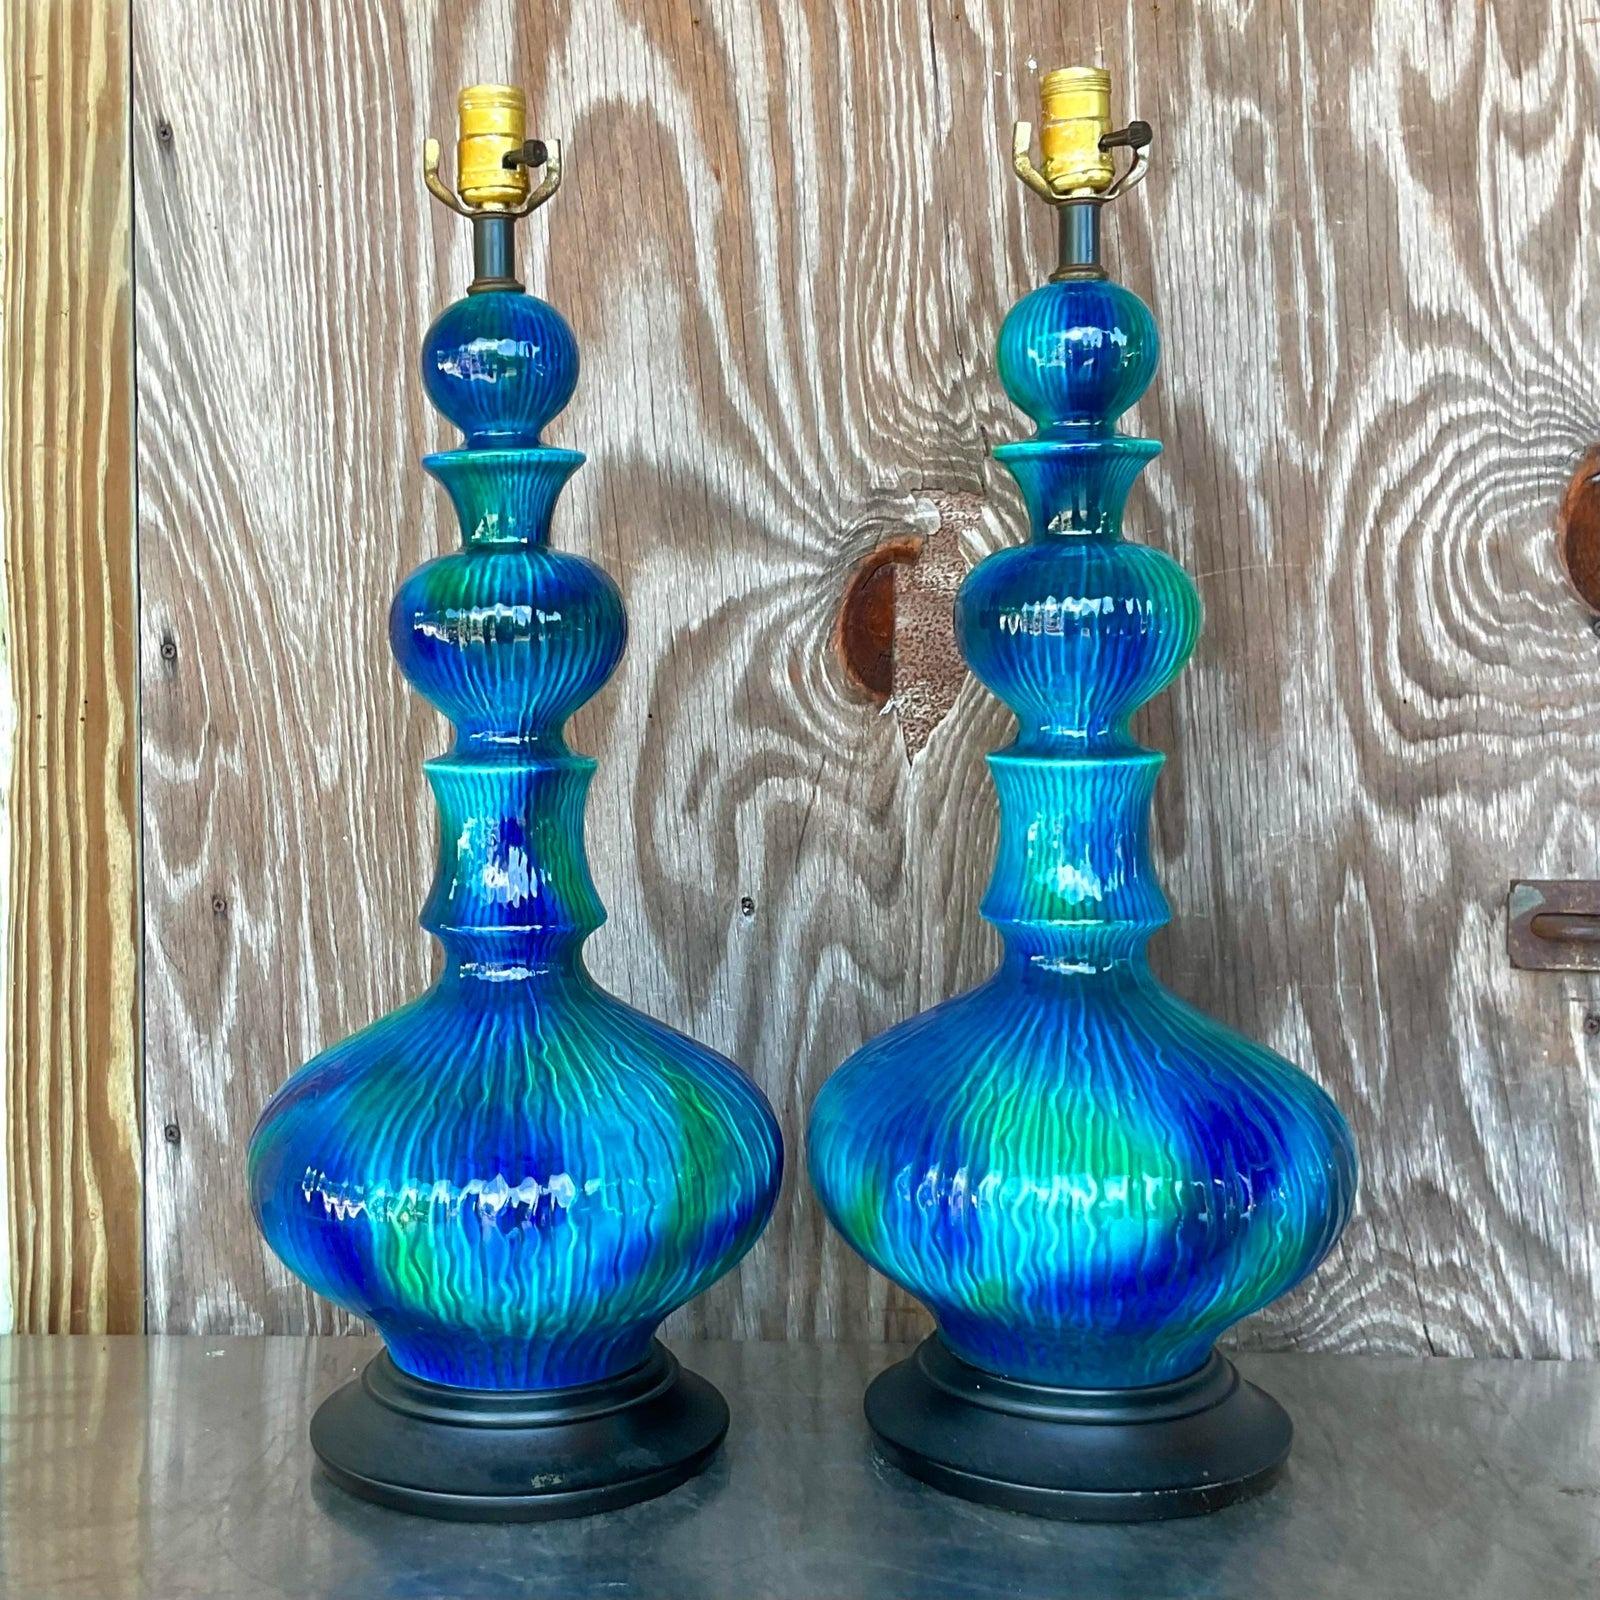 Vintage Mid 20th Century Glazed Ceramic Table Lamps - a Pair 1